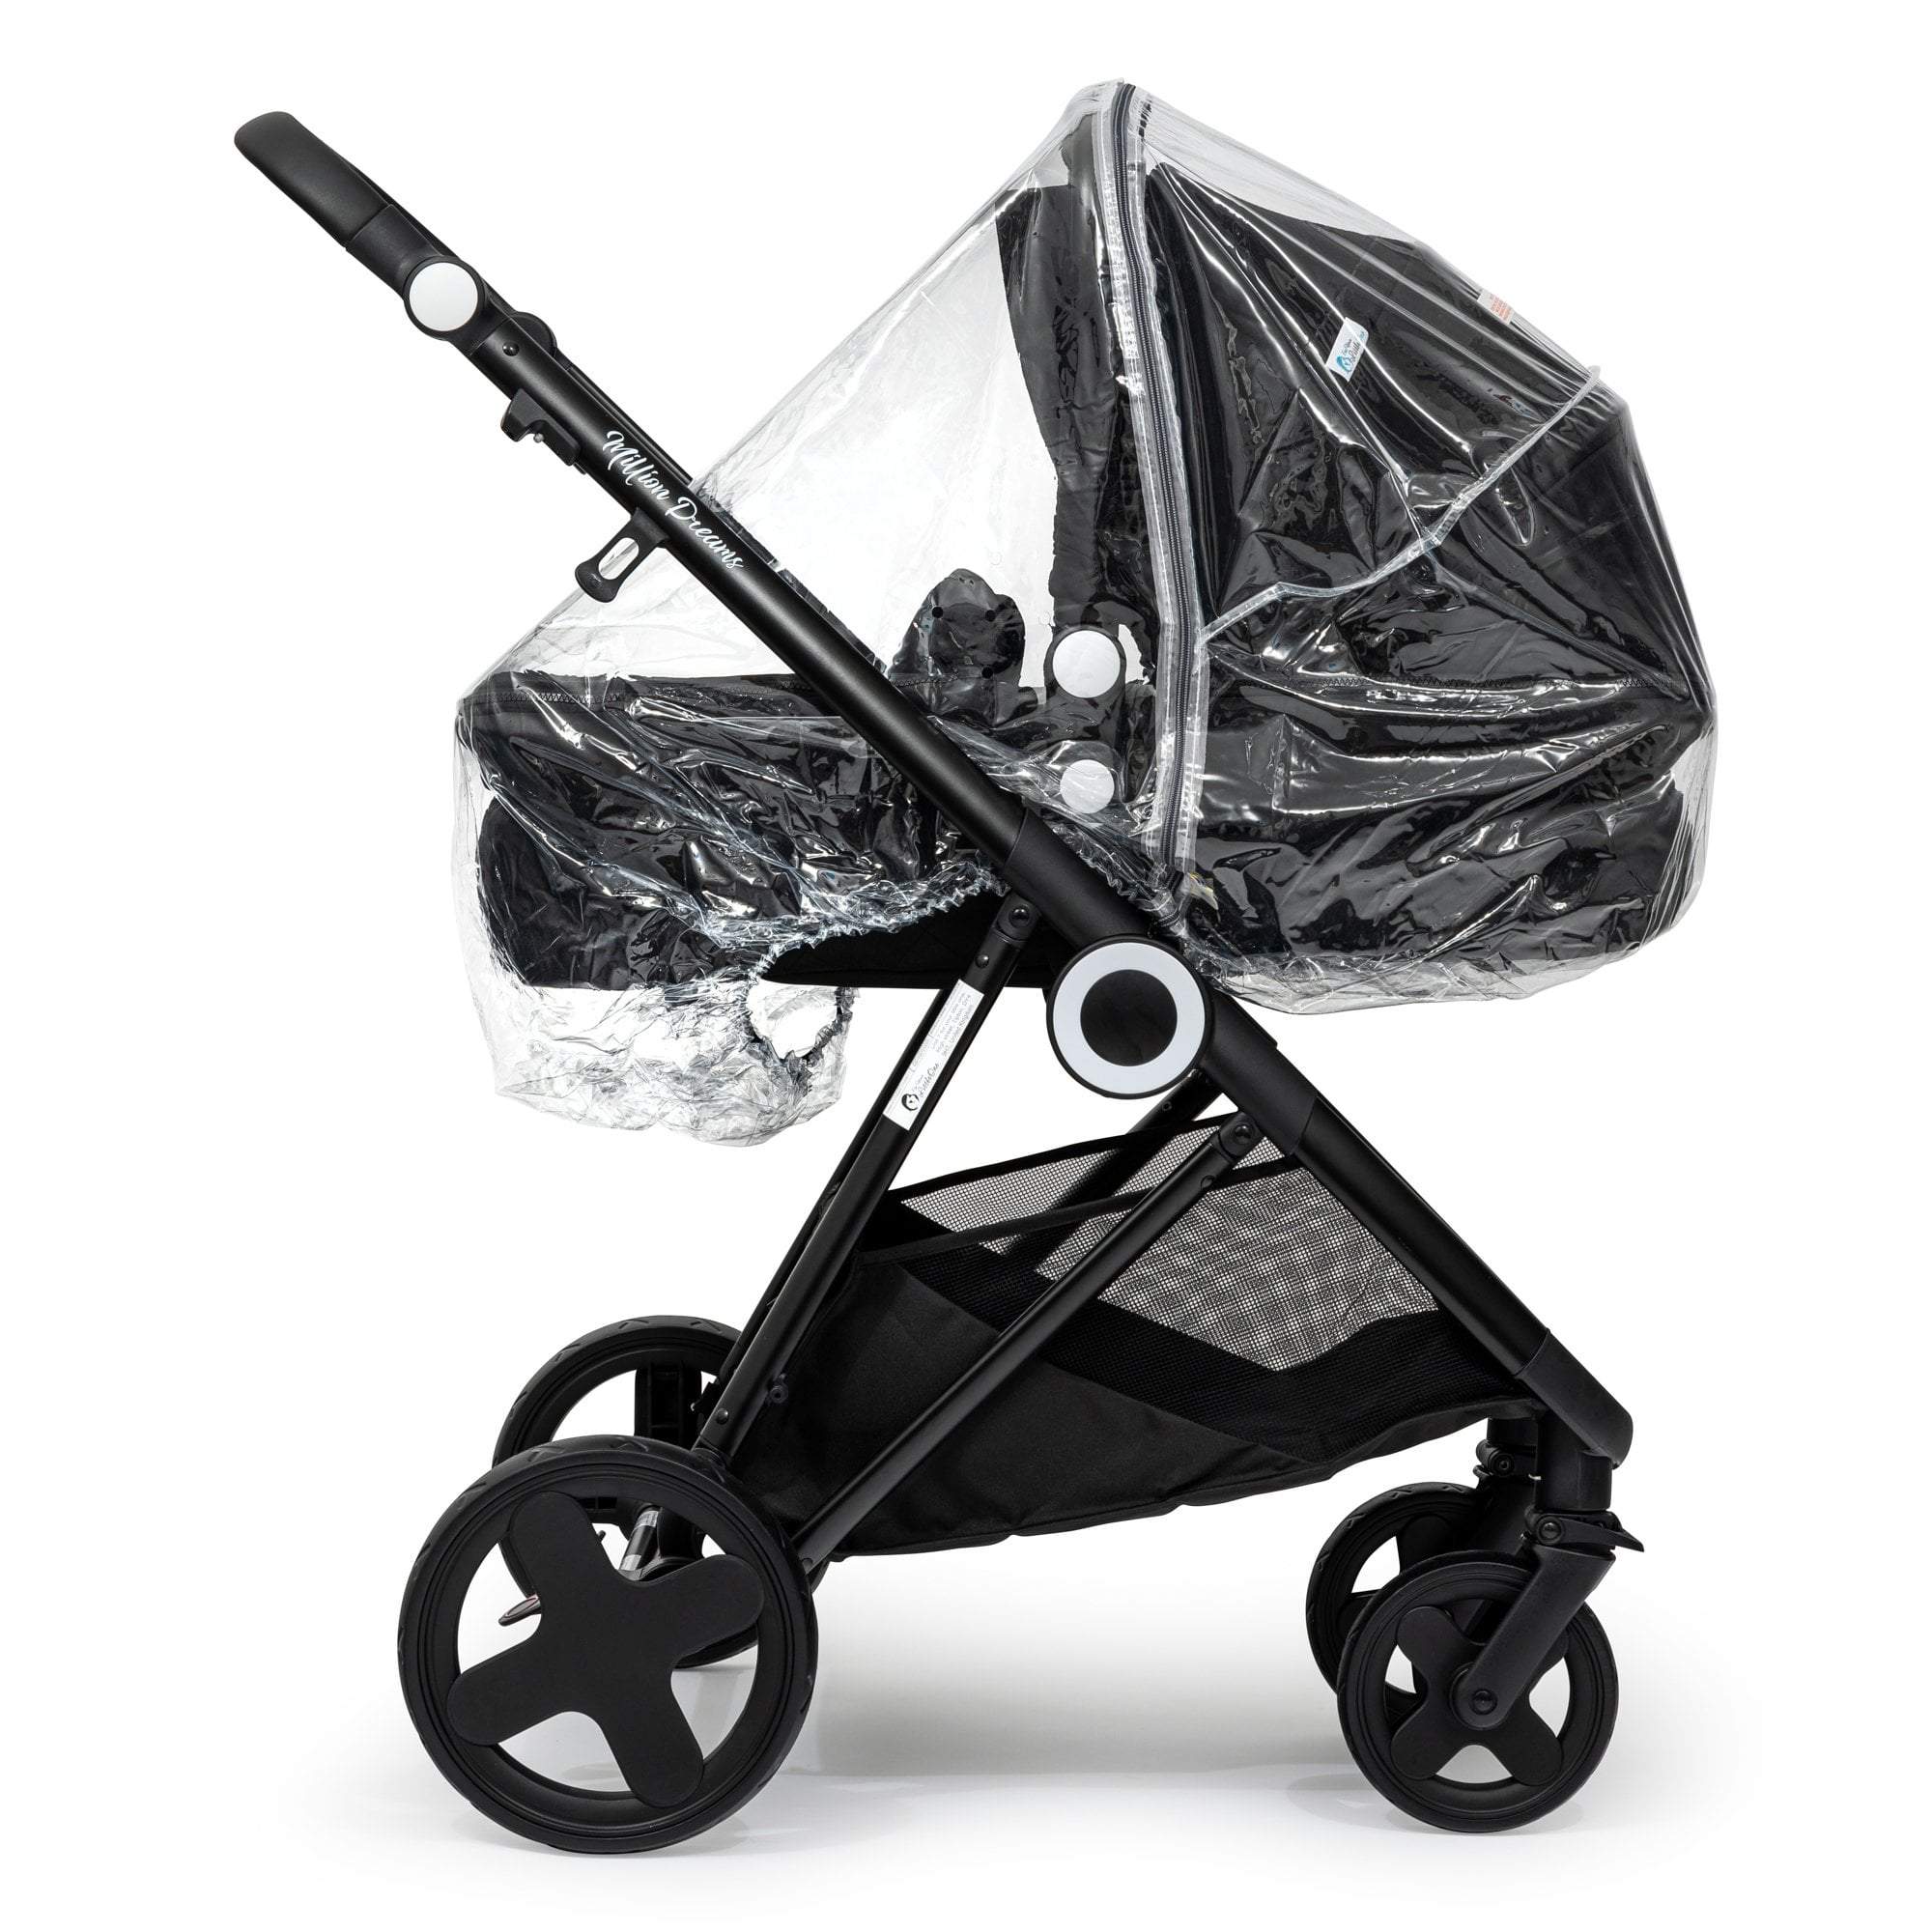 Carrycot Raincover Compatible With Egg - Fits All Models - For Your Little One